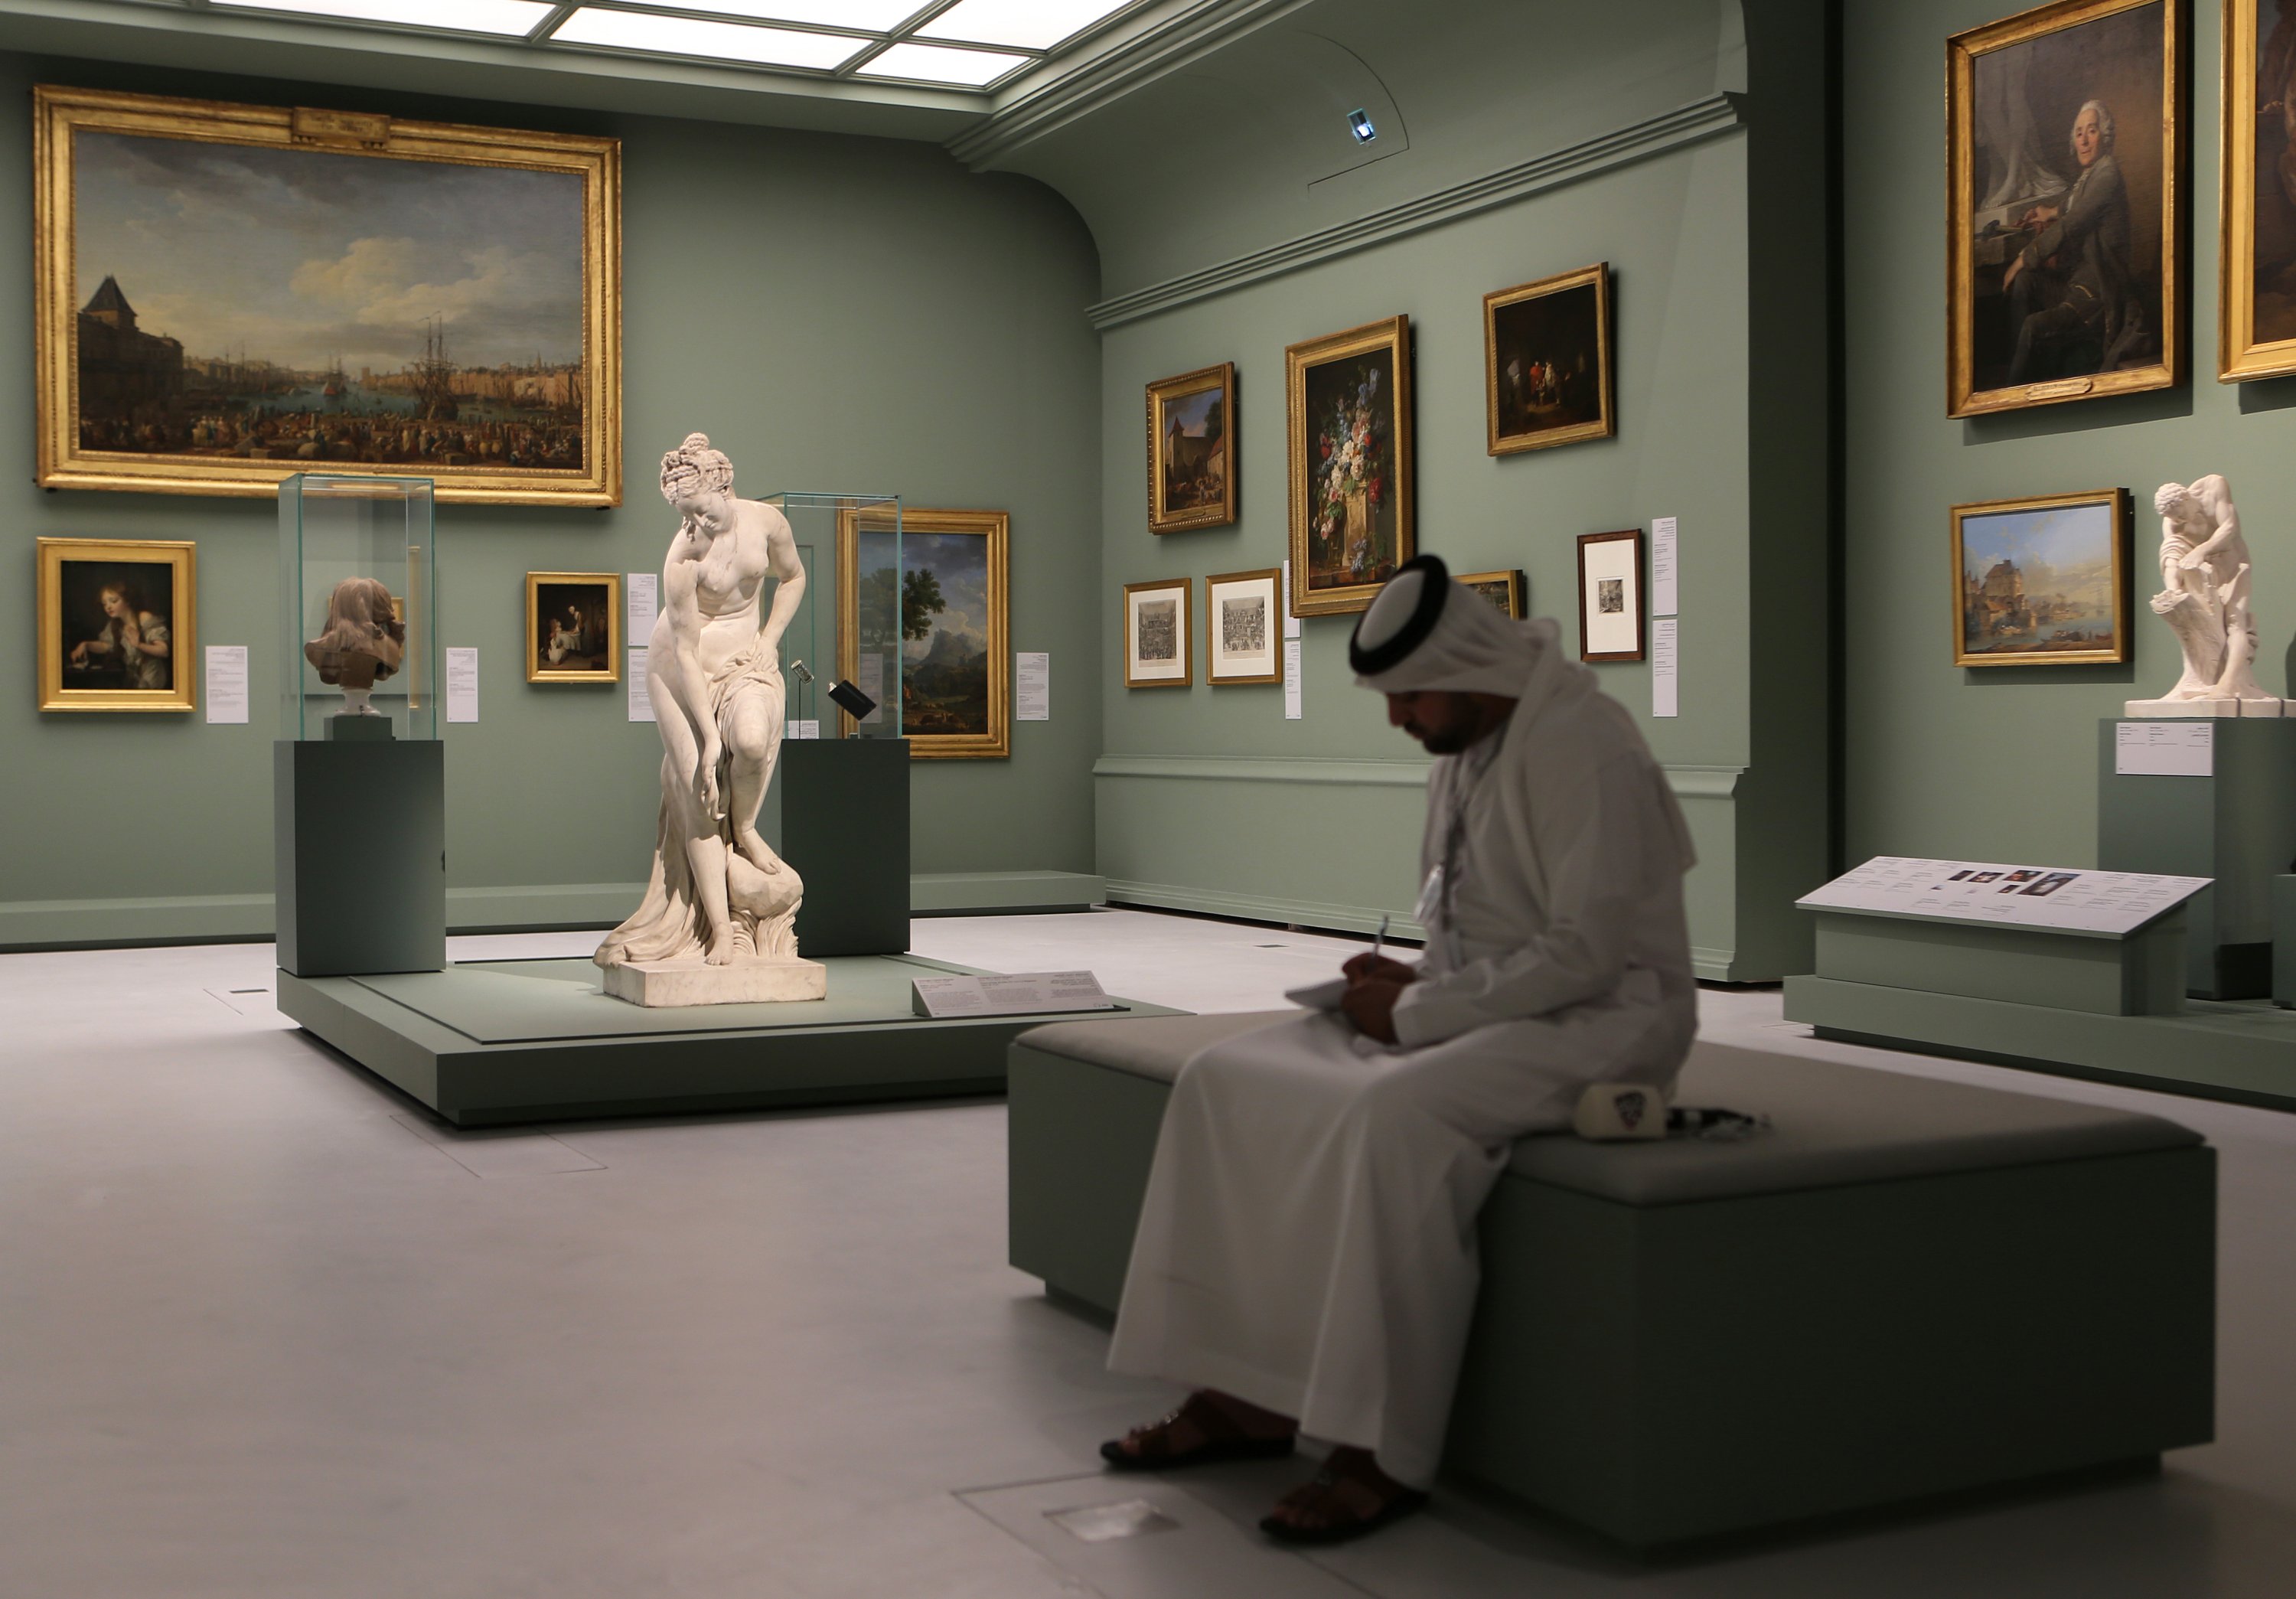 An Emirati journalist writes next to the Bather, also called Venus statue by Christophe-Gabriel Allegrain, 1710-1795, at the Louvre Museum in Abu Dhabi, United Arab Emirates, Dec. 19, 2017. (AP PHOTO)